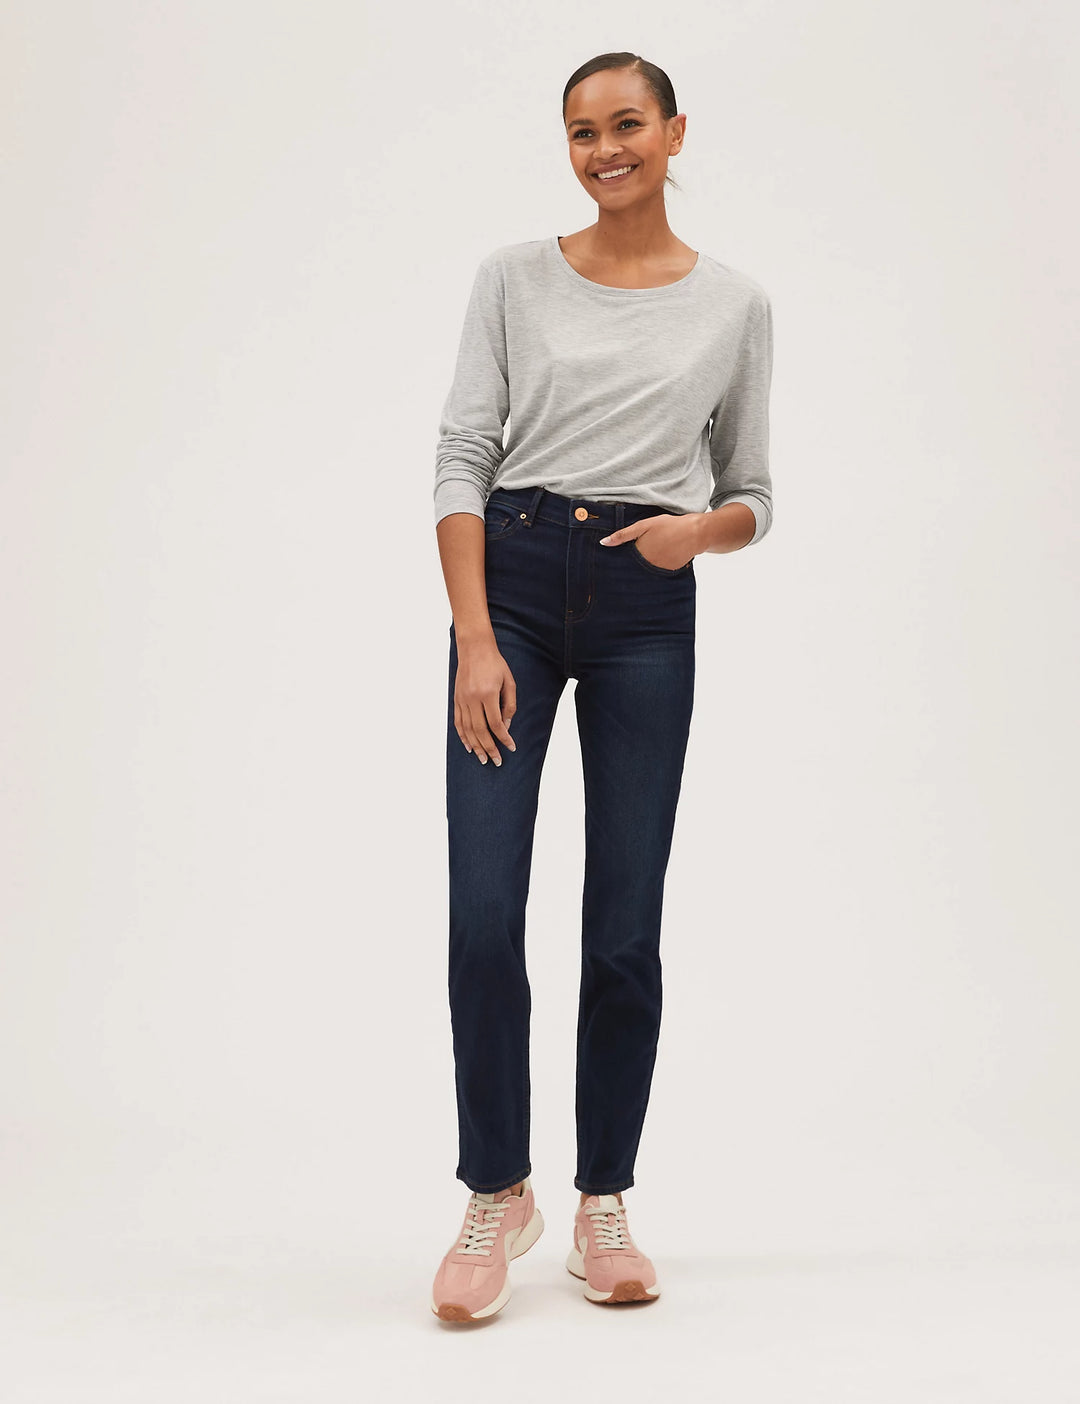 M&S The Sienna Straight High Rse Jeans T57/7566